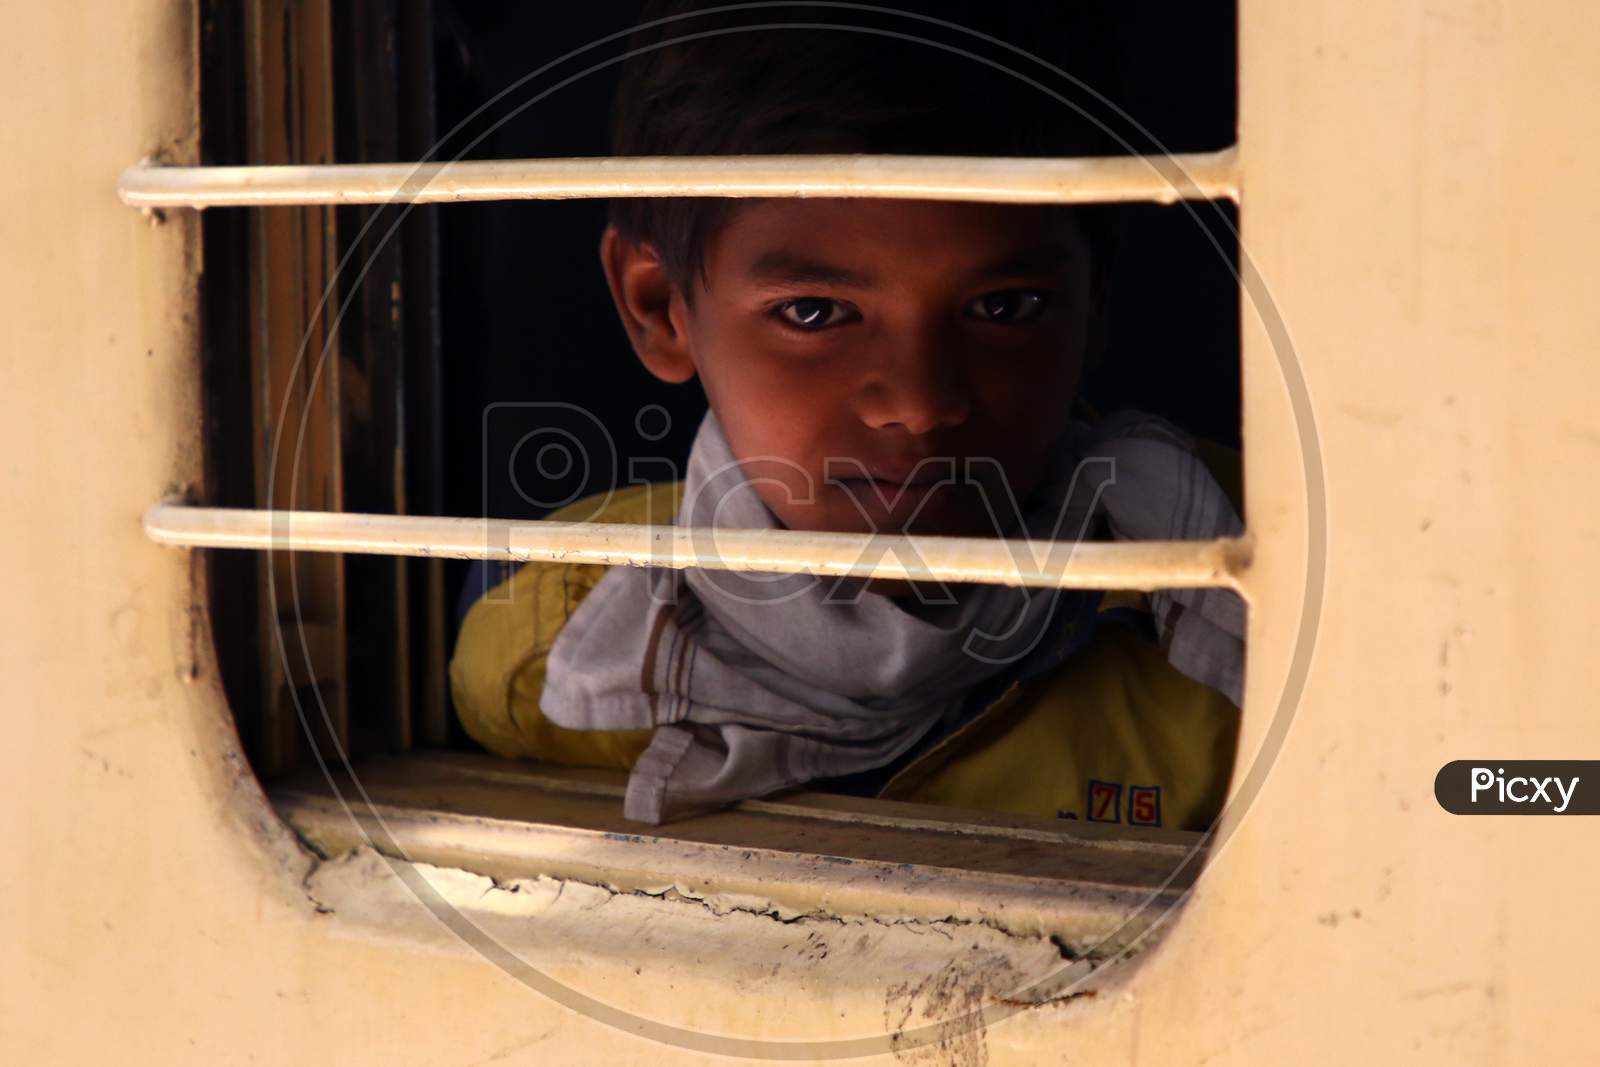 A Stranded migrant boards a special train to Bihar State from Ajmer railway station during a government-imposed nationwide lockdown as a preventive measure against the COVID-19 coronavirus, in Ajmer on May 13, 2020.